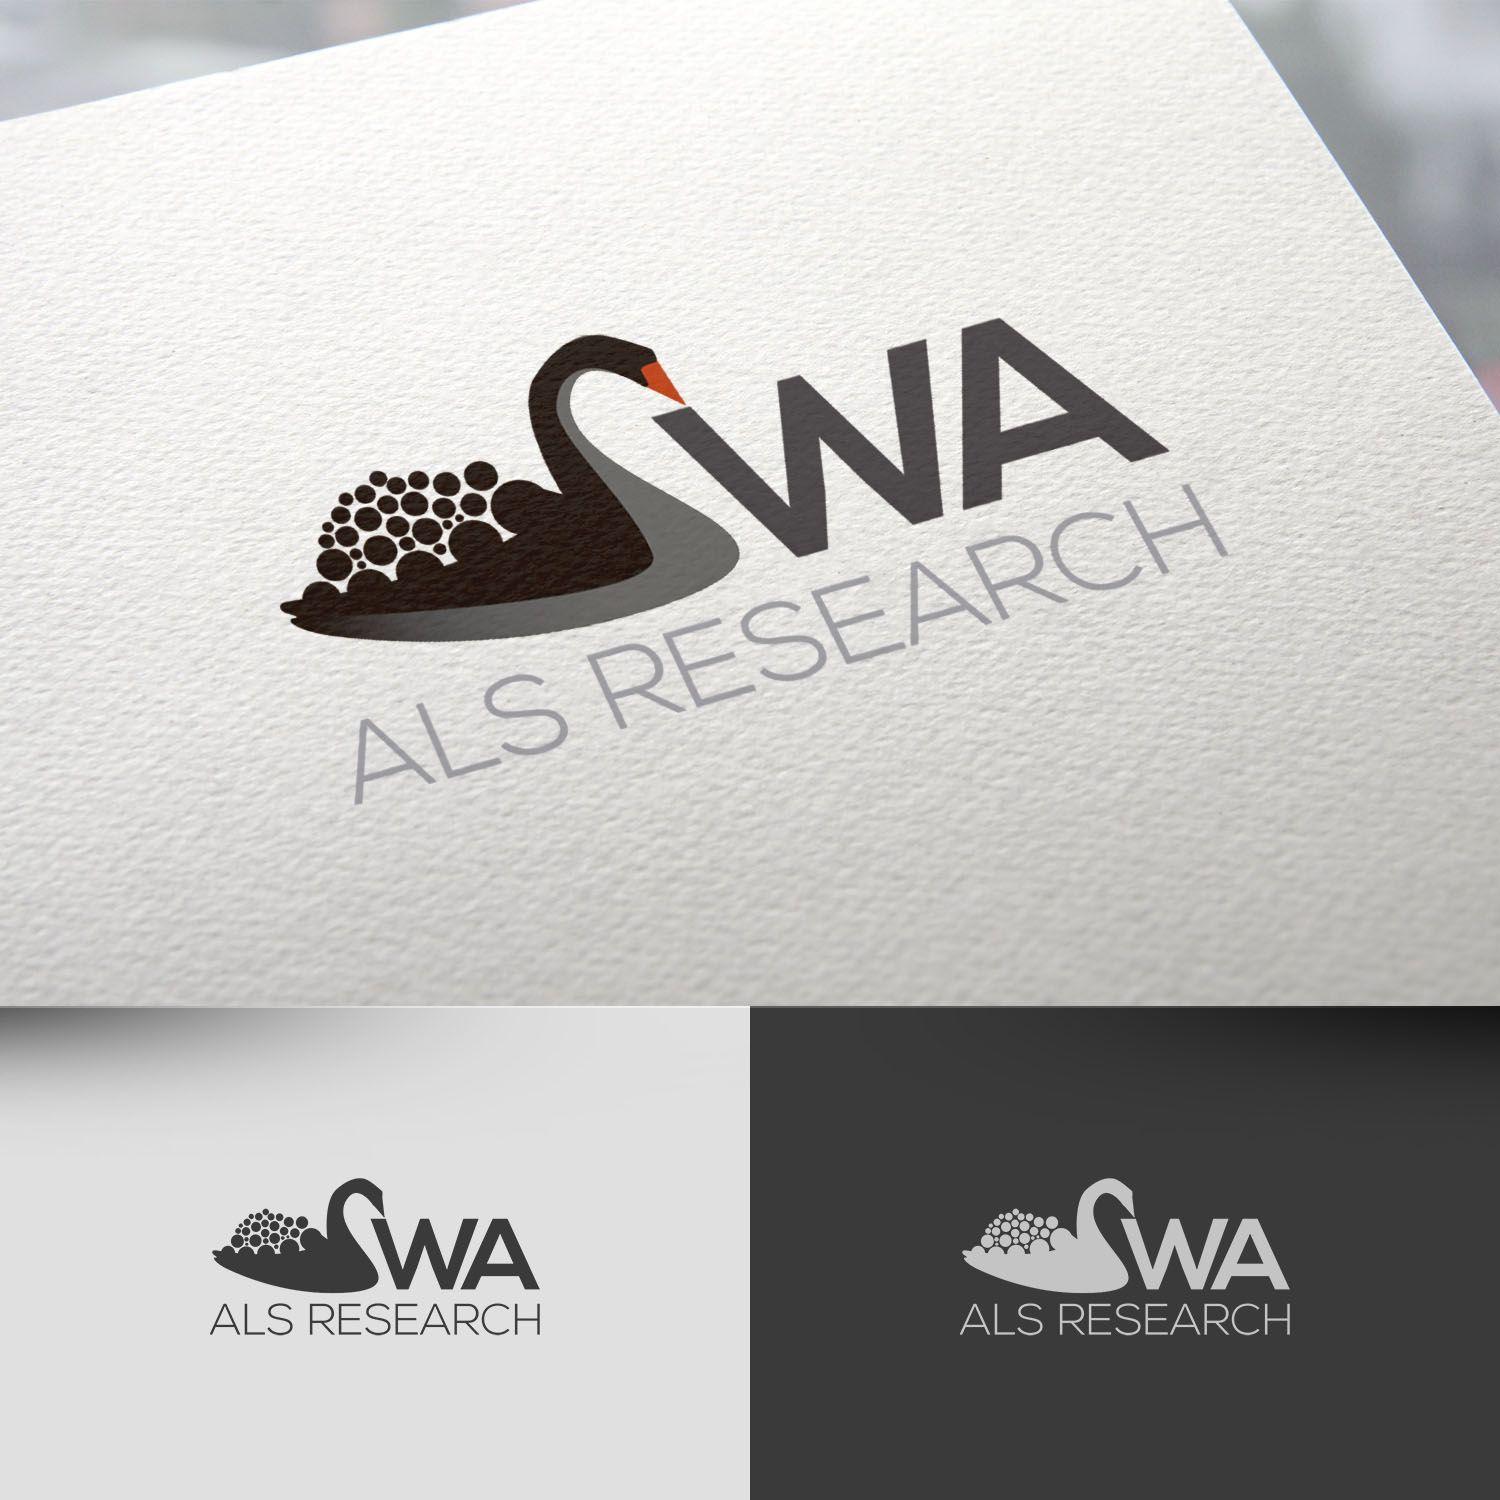 Black Swan Company Logo - Professional, Serious, Pharmaceutical Logo Design for Open but ...